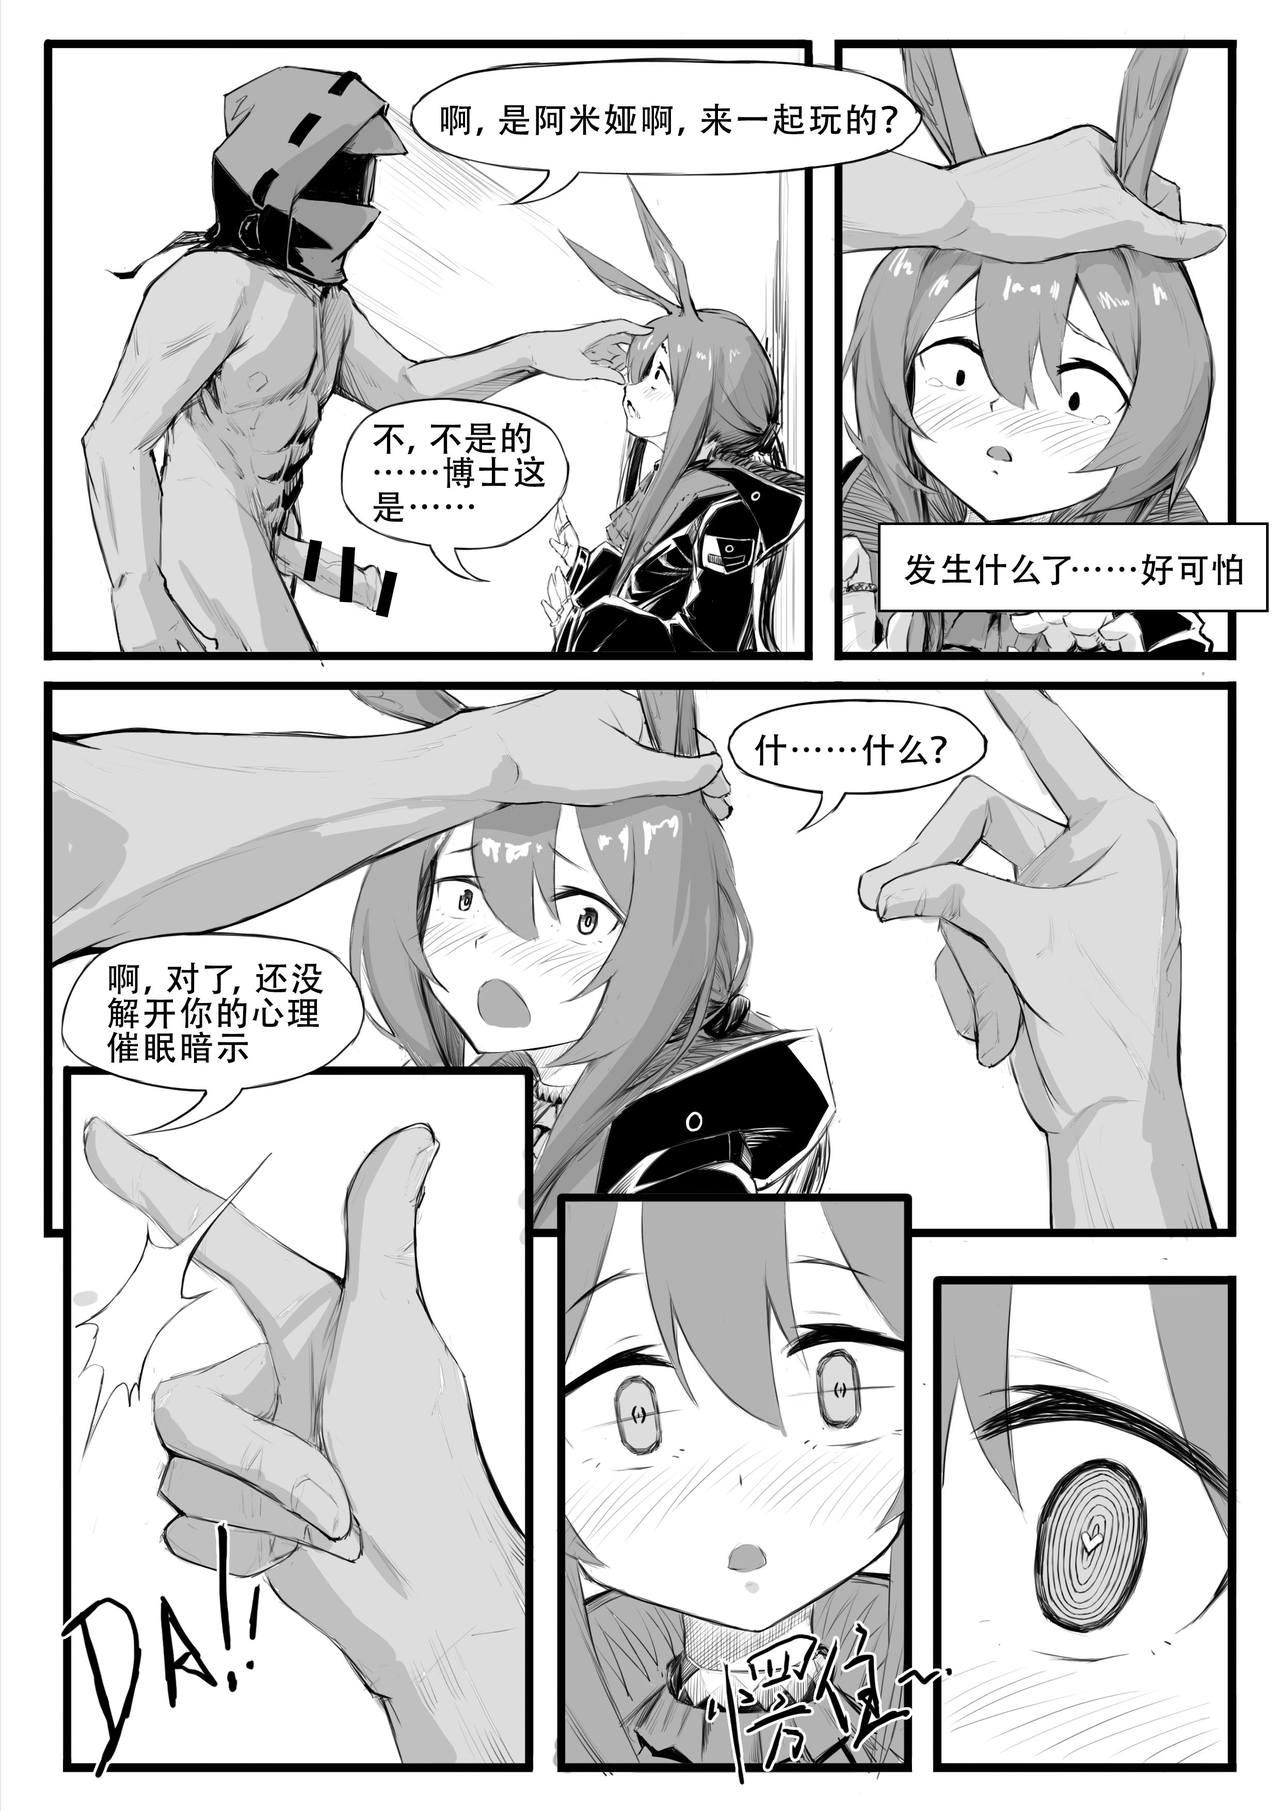 Passion 最近的罗德岛不太对劲 - Arknights Young - Page 7